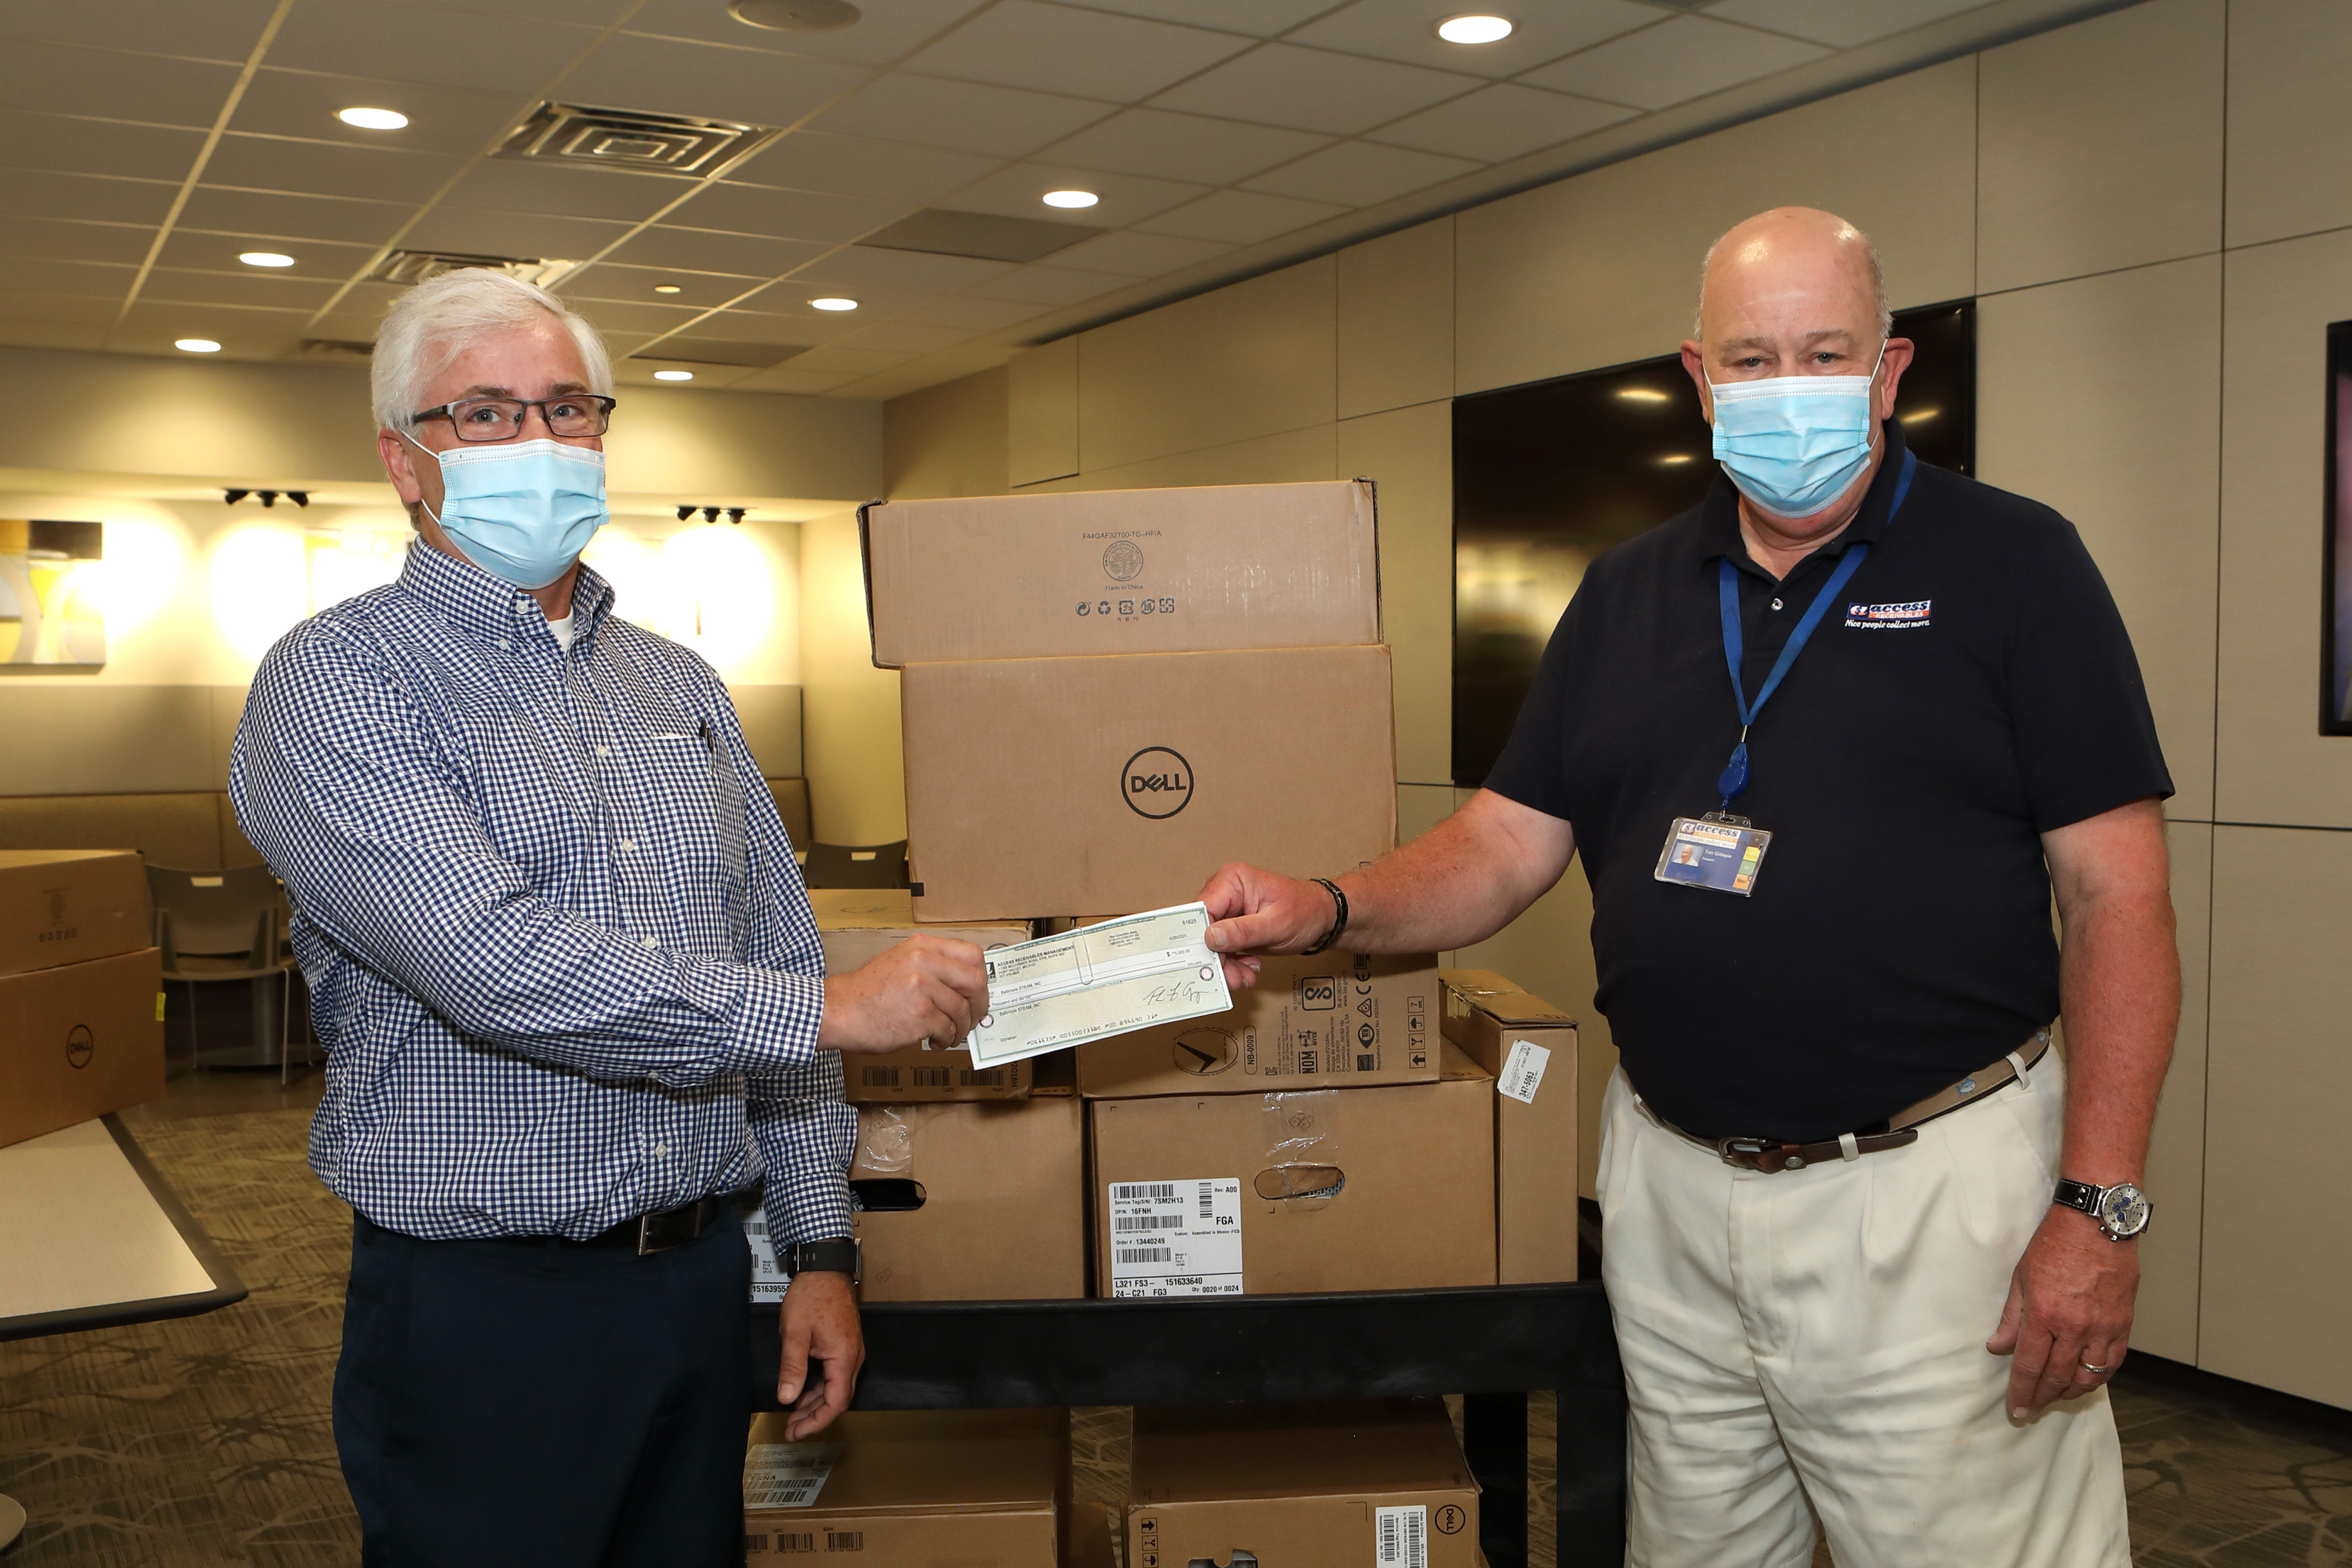 Ed Mullin, co-founder of DigiBmore receives donation from Tom Gillespie, president of Access Receivables Management